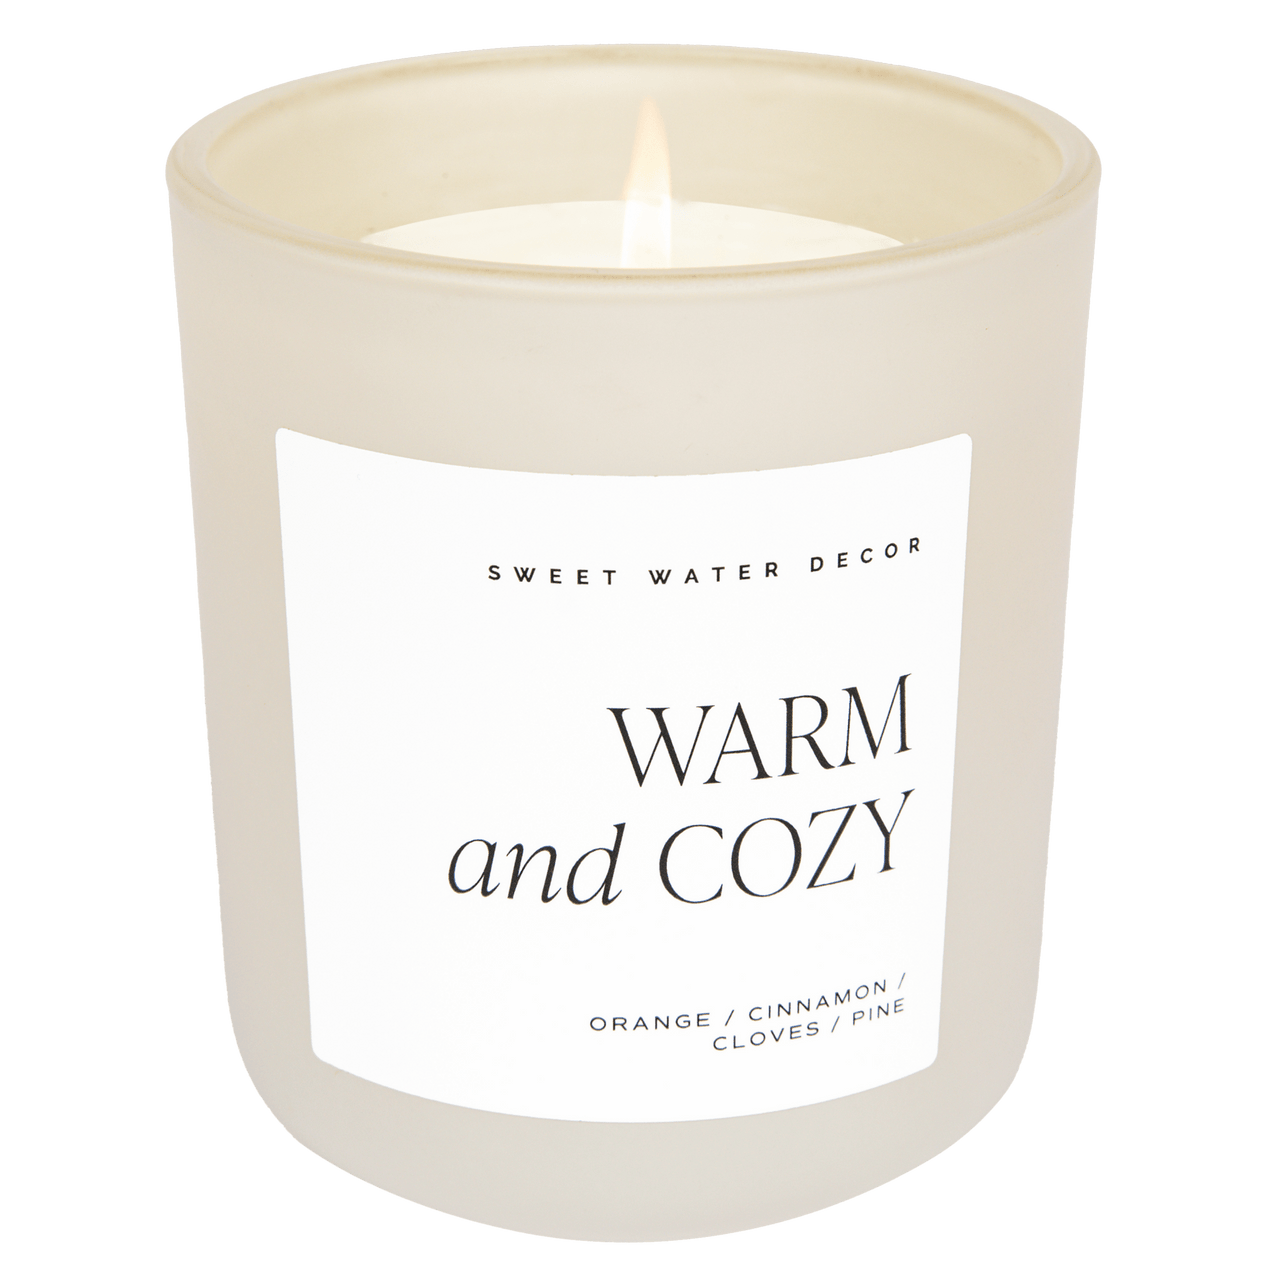 Warm and Cozy Soy Candle - Tan Matte Jar - 15 oz - Tony's Home Furnishings